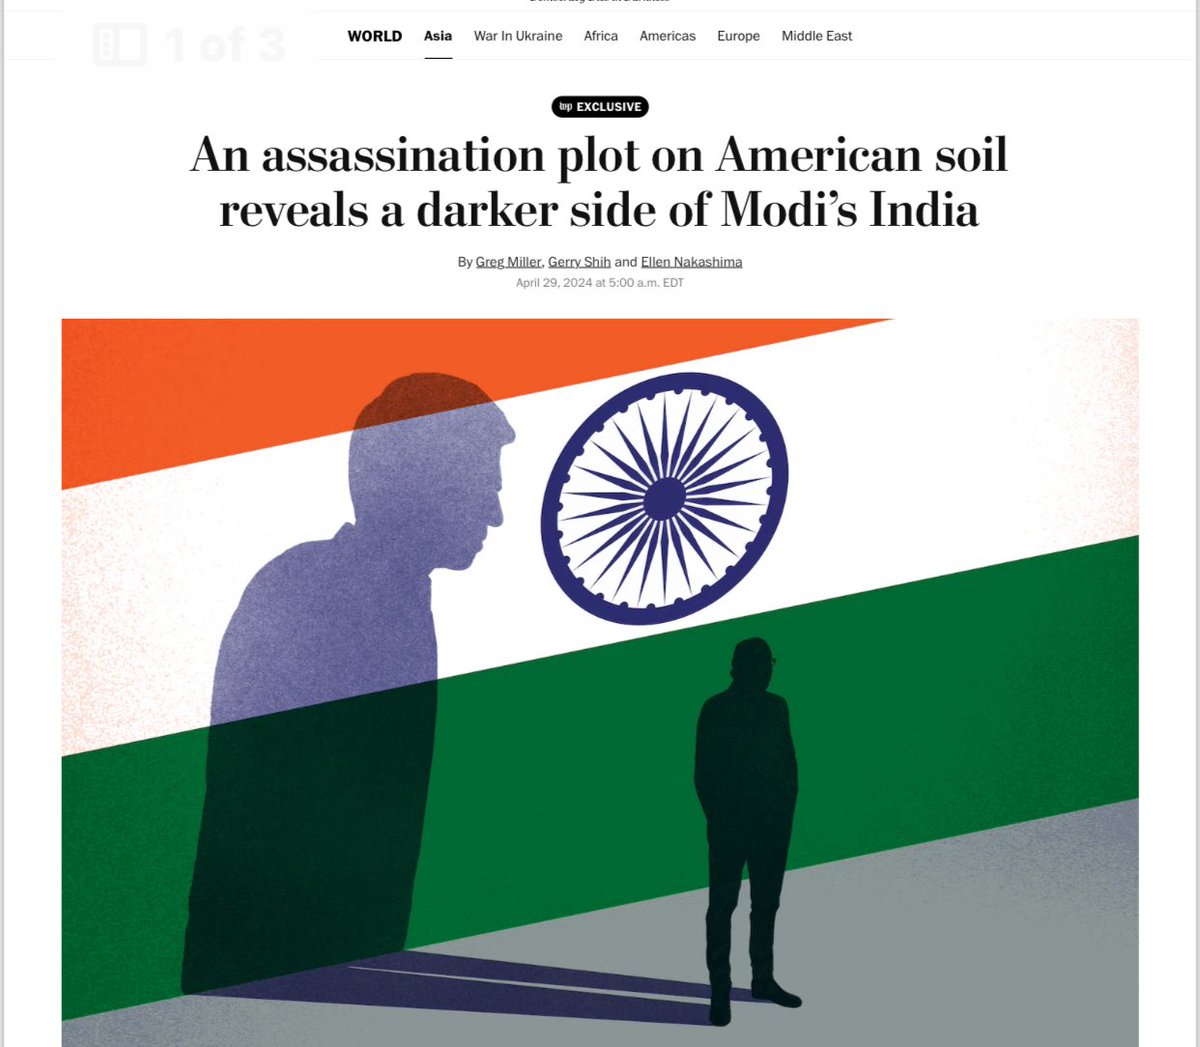 BREAKING: Washington Post reports that Indian spy Vikram Yadav directed assassination plots against Sikh activists in the U.S. and Canada on orders from intel chief Samant Goel, stunning officials. CIA assesses NSA Doval likely knew, possibly Modi. India stalls probe, refusing to…